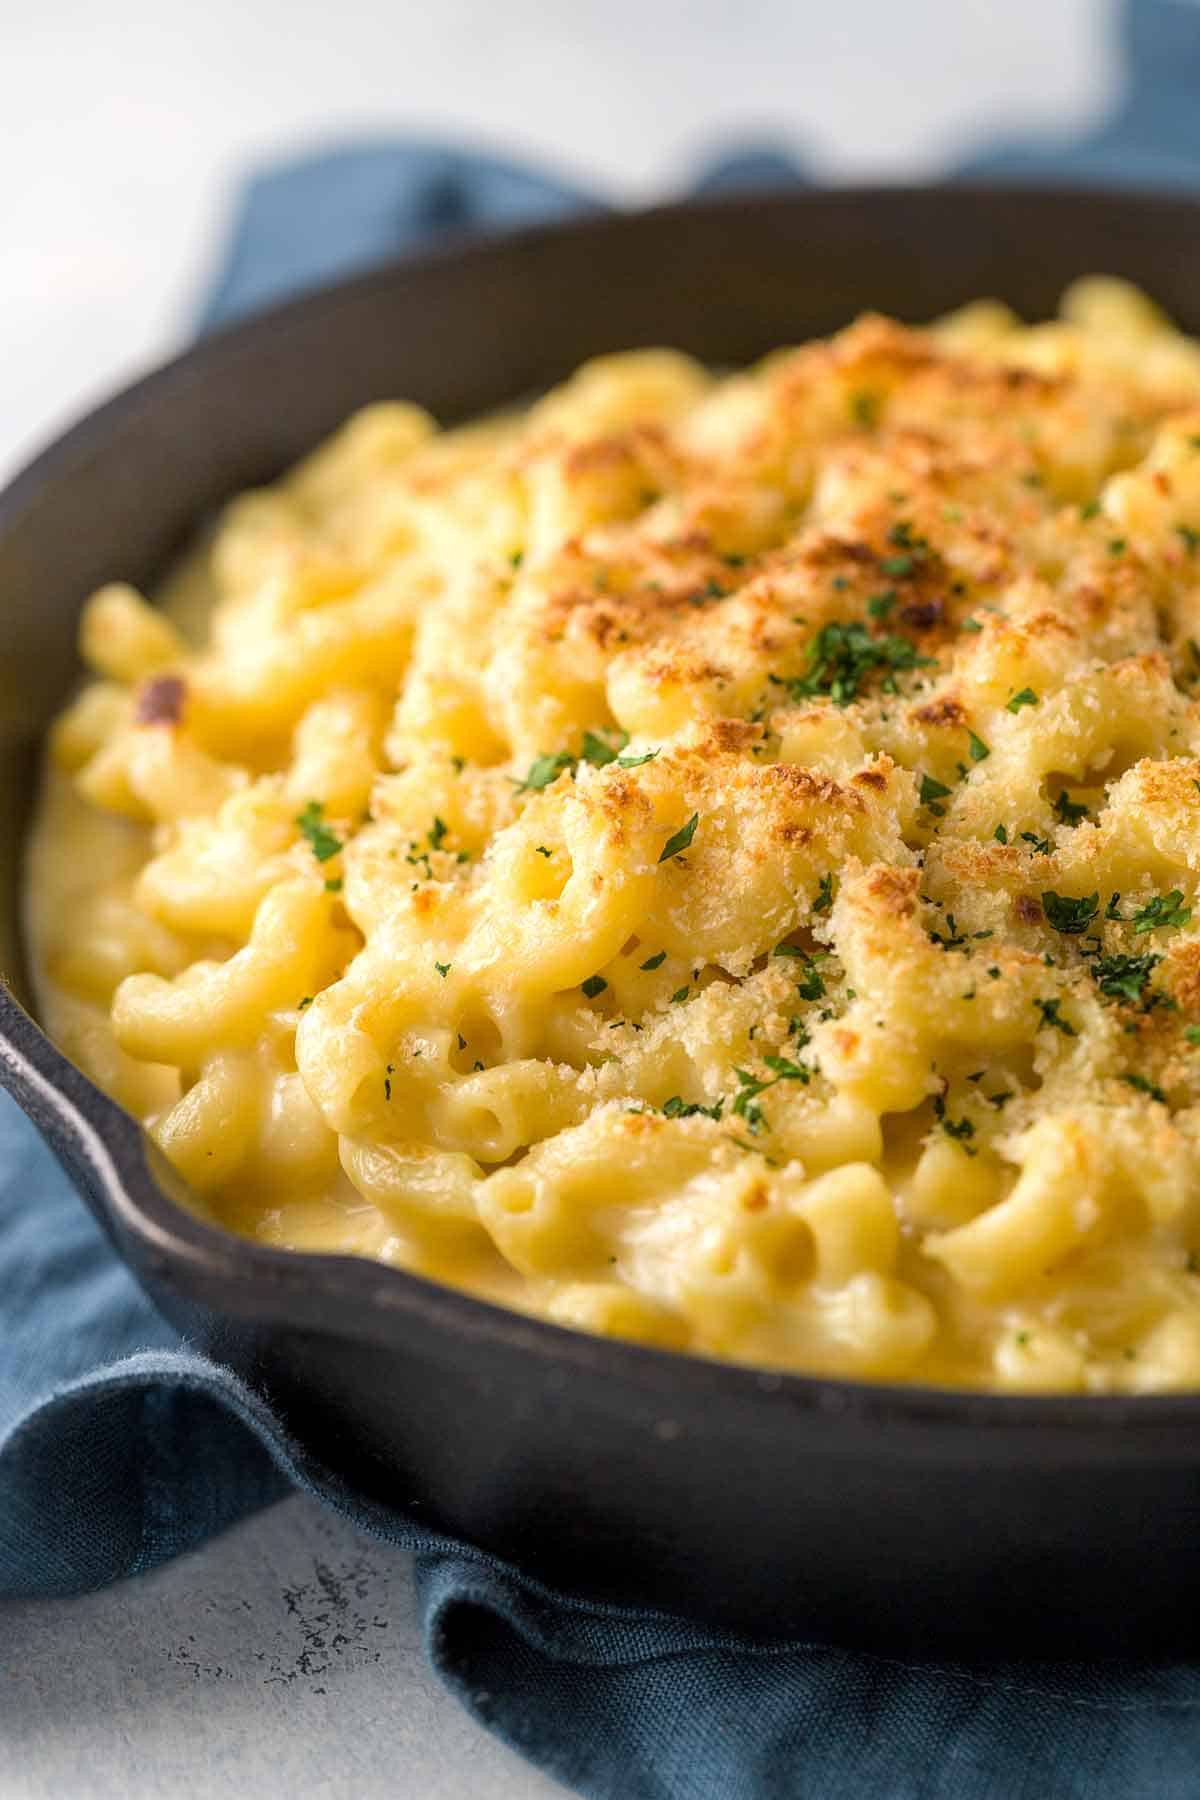 Baked Macaroni And Cheese With Bread Crumbs Recipe
 Baked Macaroni and Cheese with Bread Crumb Topping